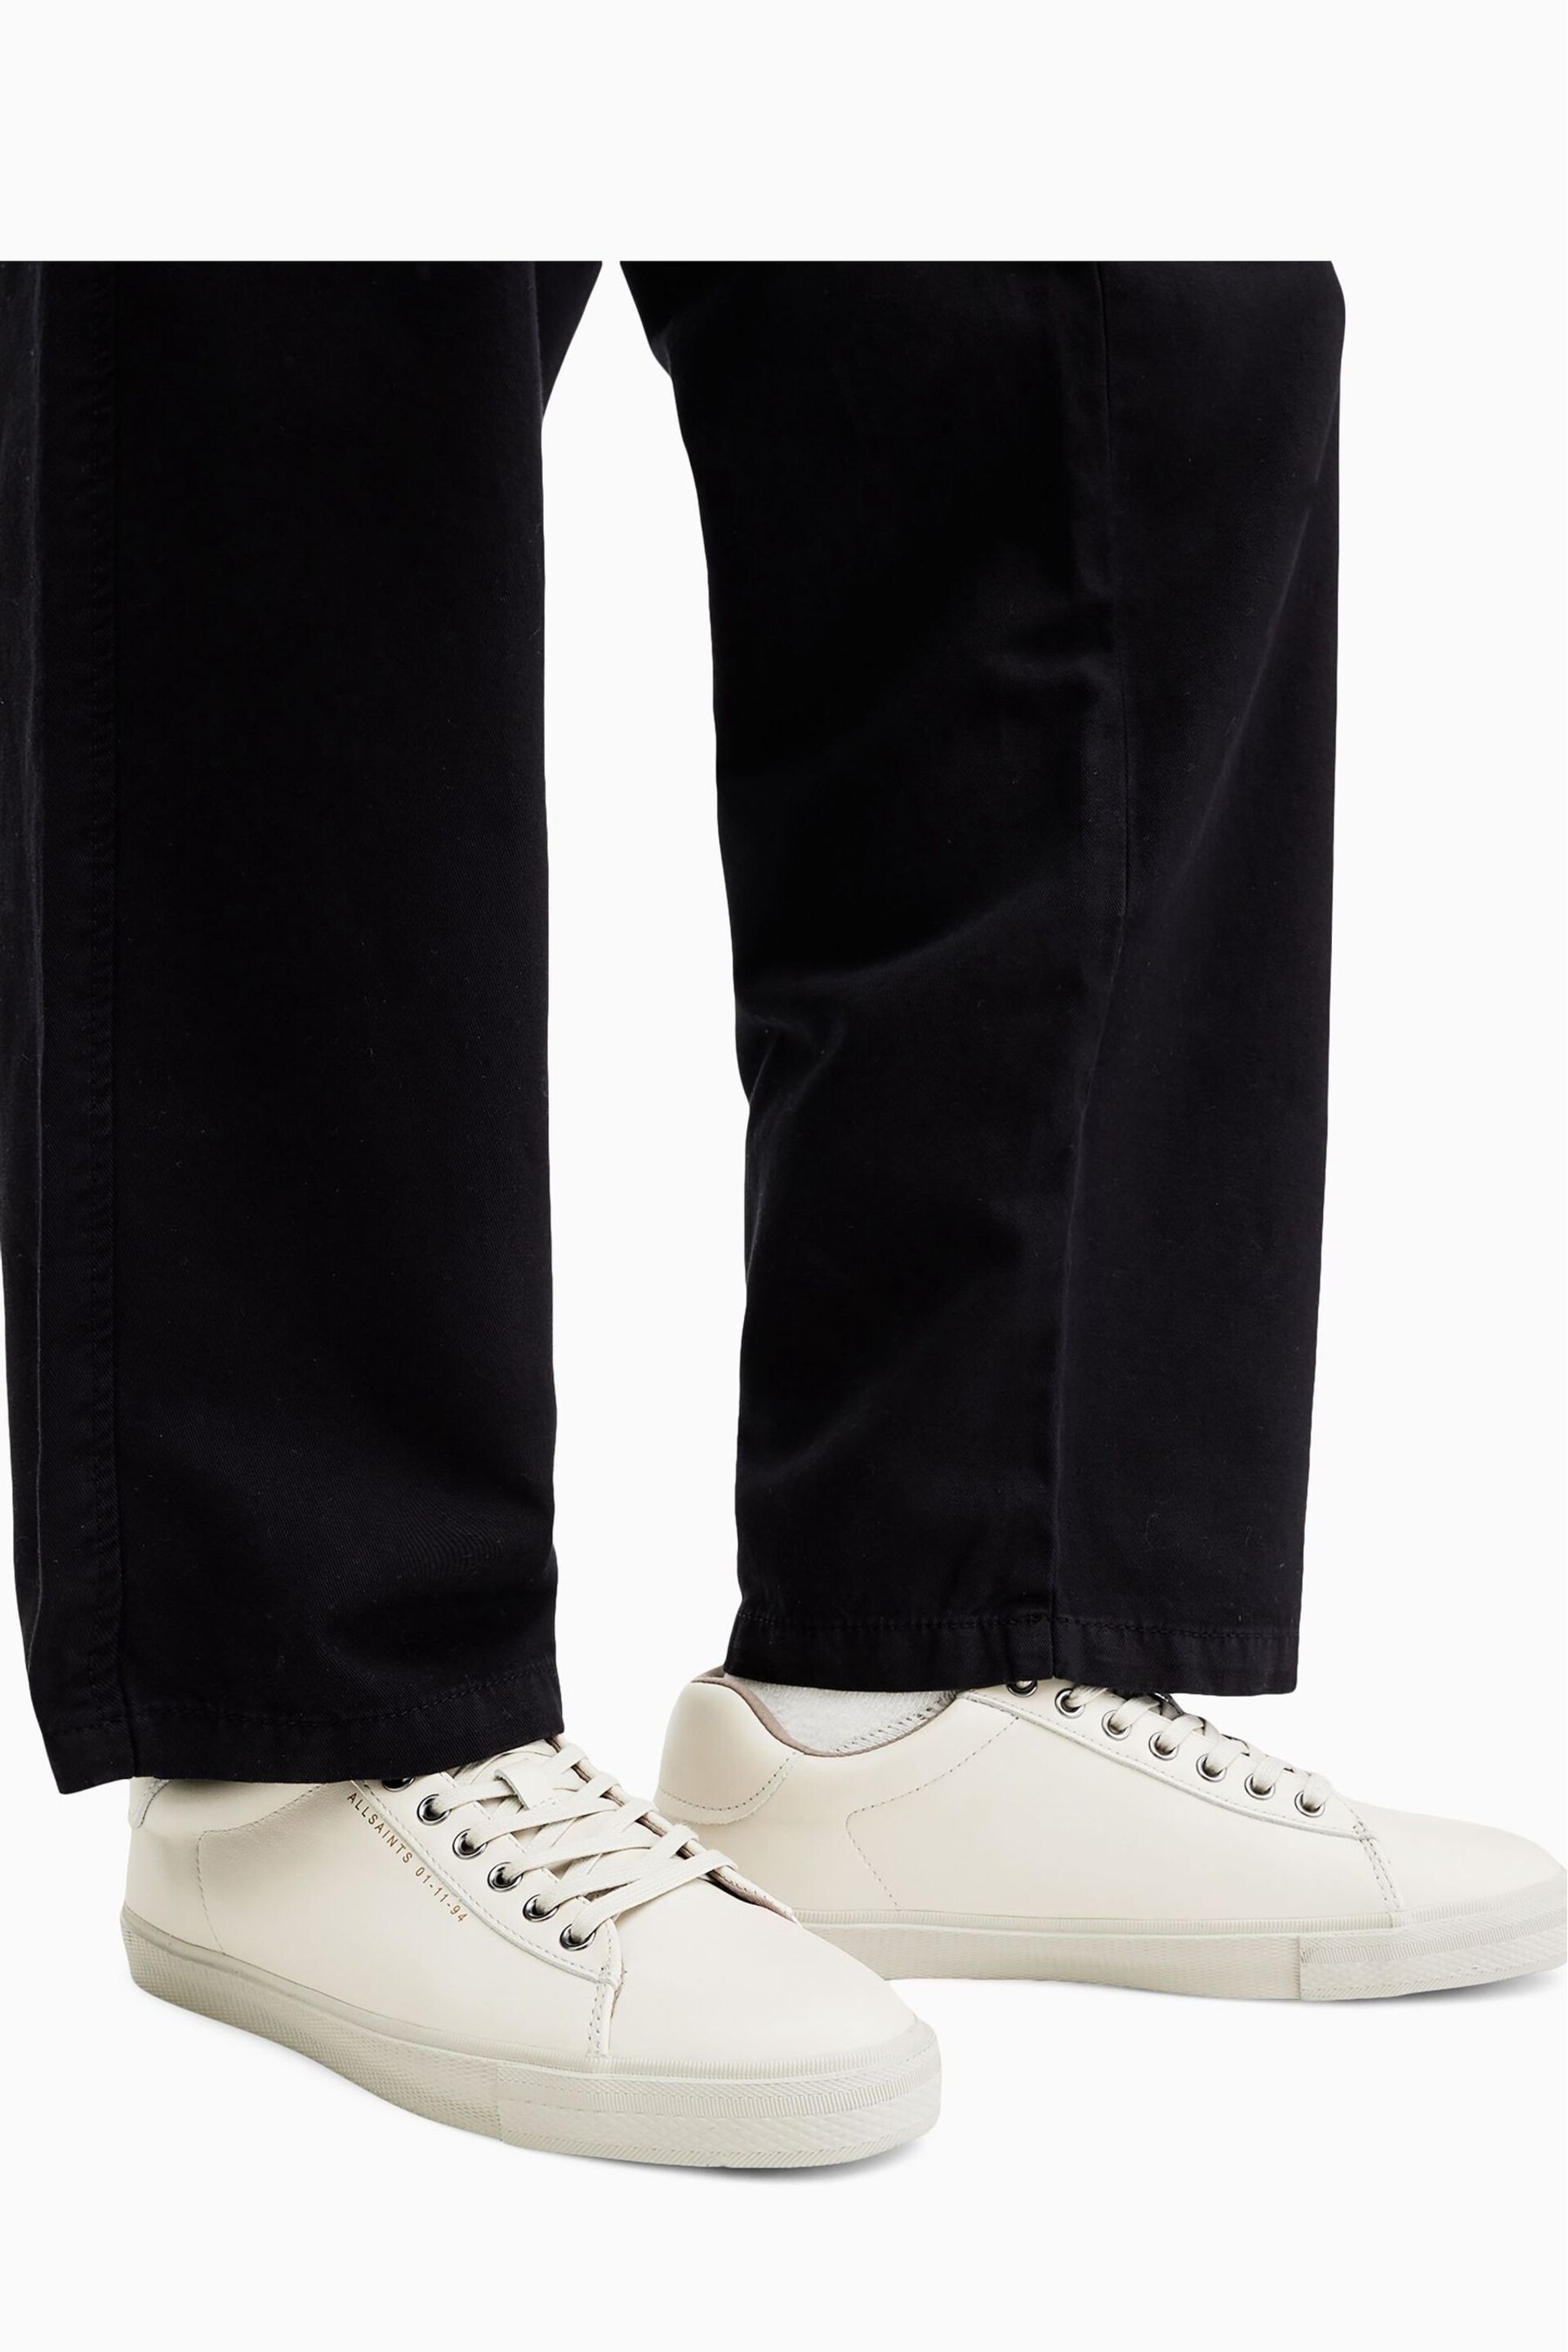 AllSaints White Brody Leather Low Top Trainers - Image 5 of 7